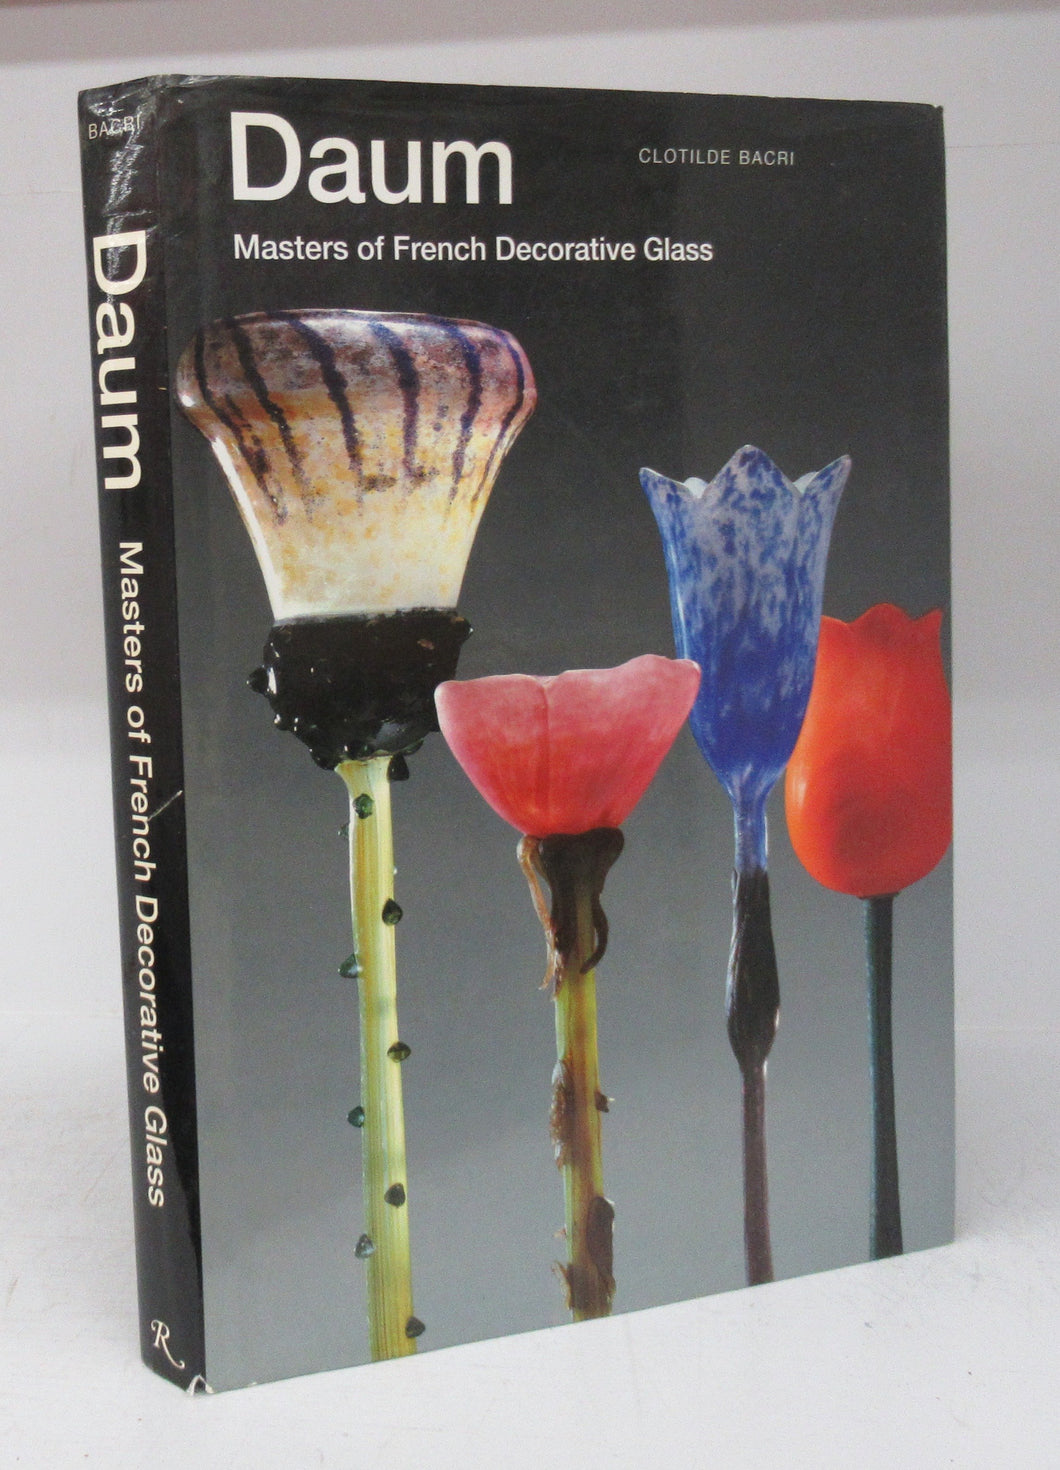 Daum: Masters of French Decorative Glass